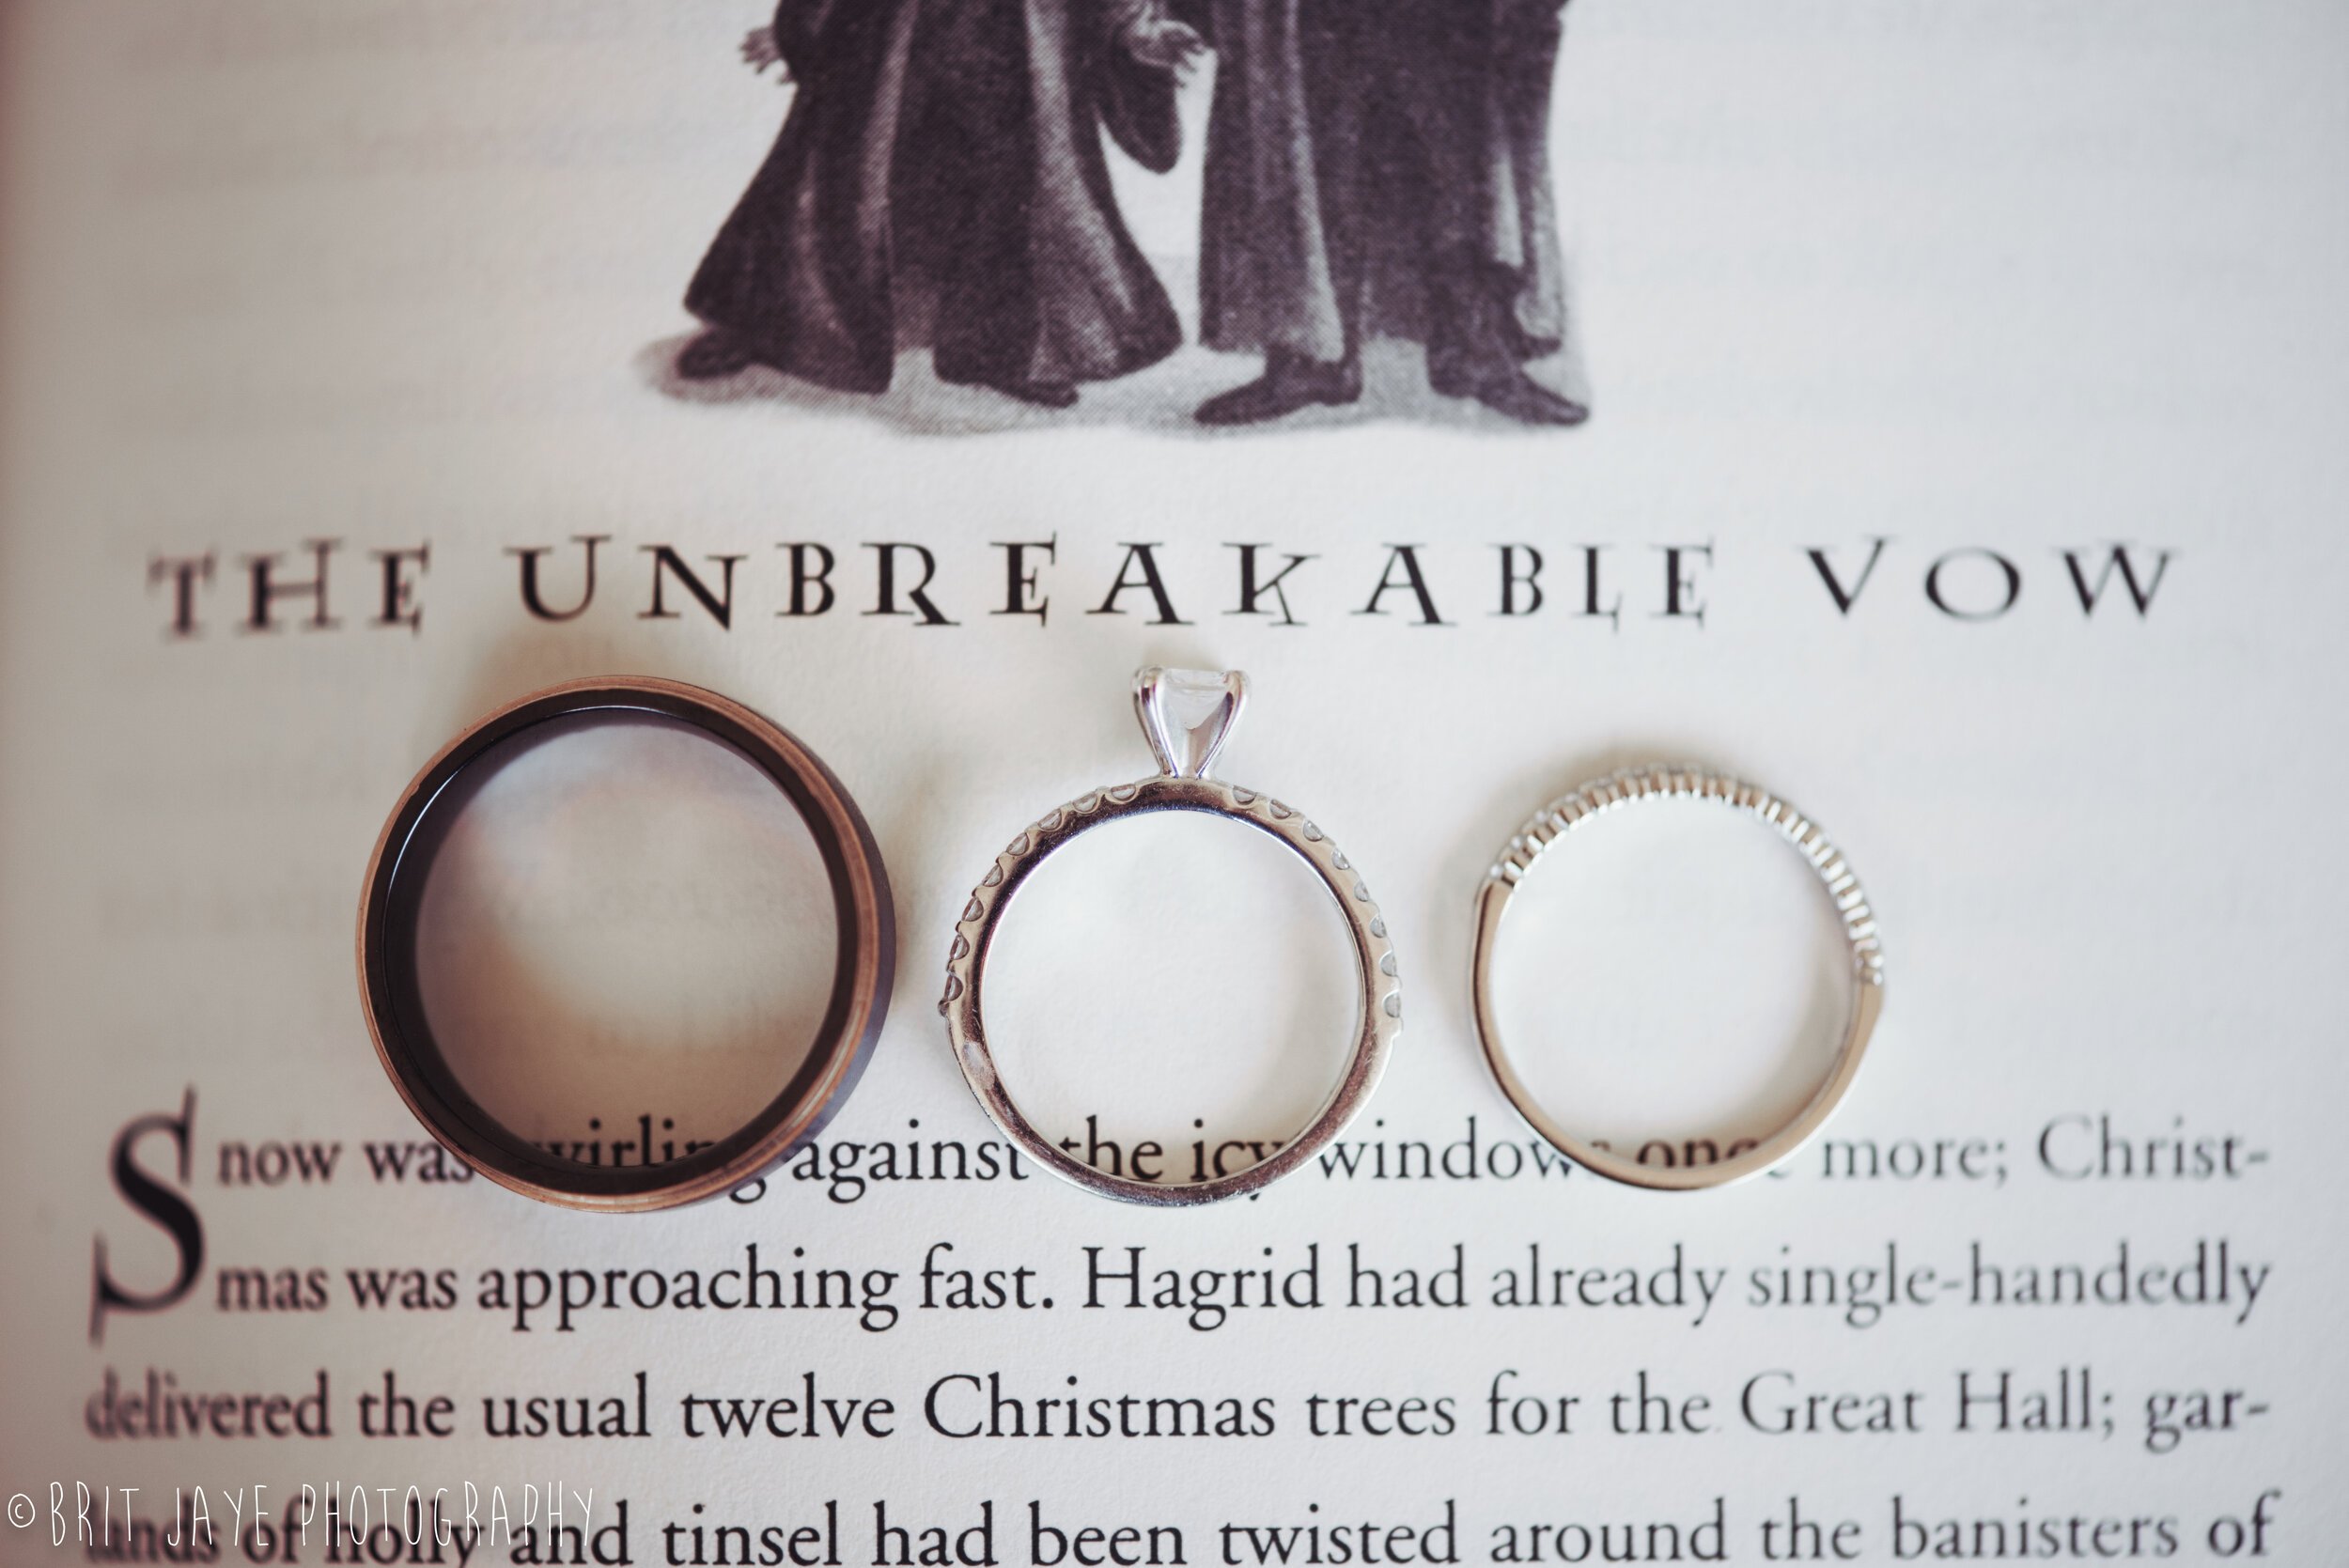  Get a photo of your ring on the page of a book.  